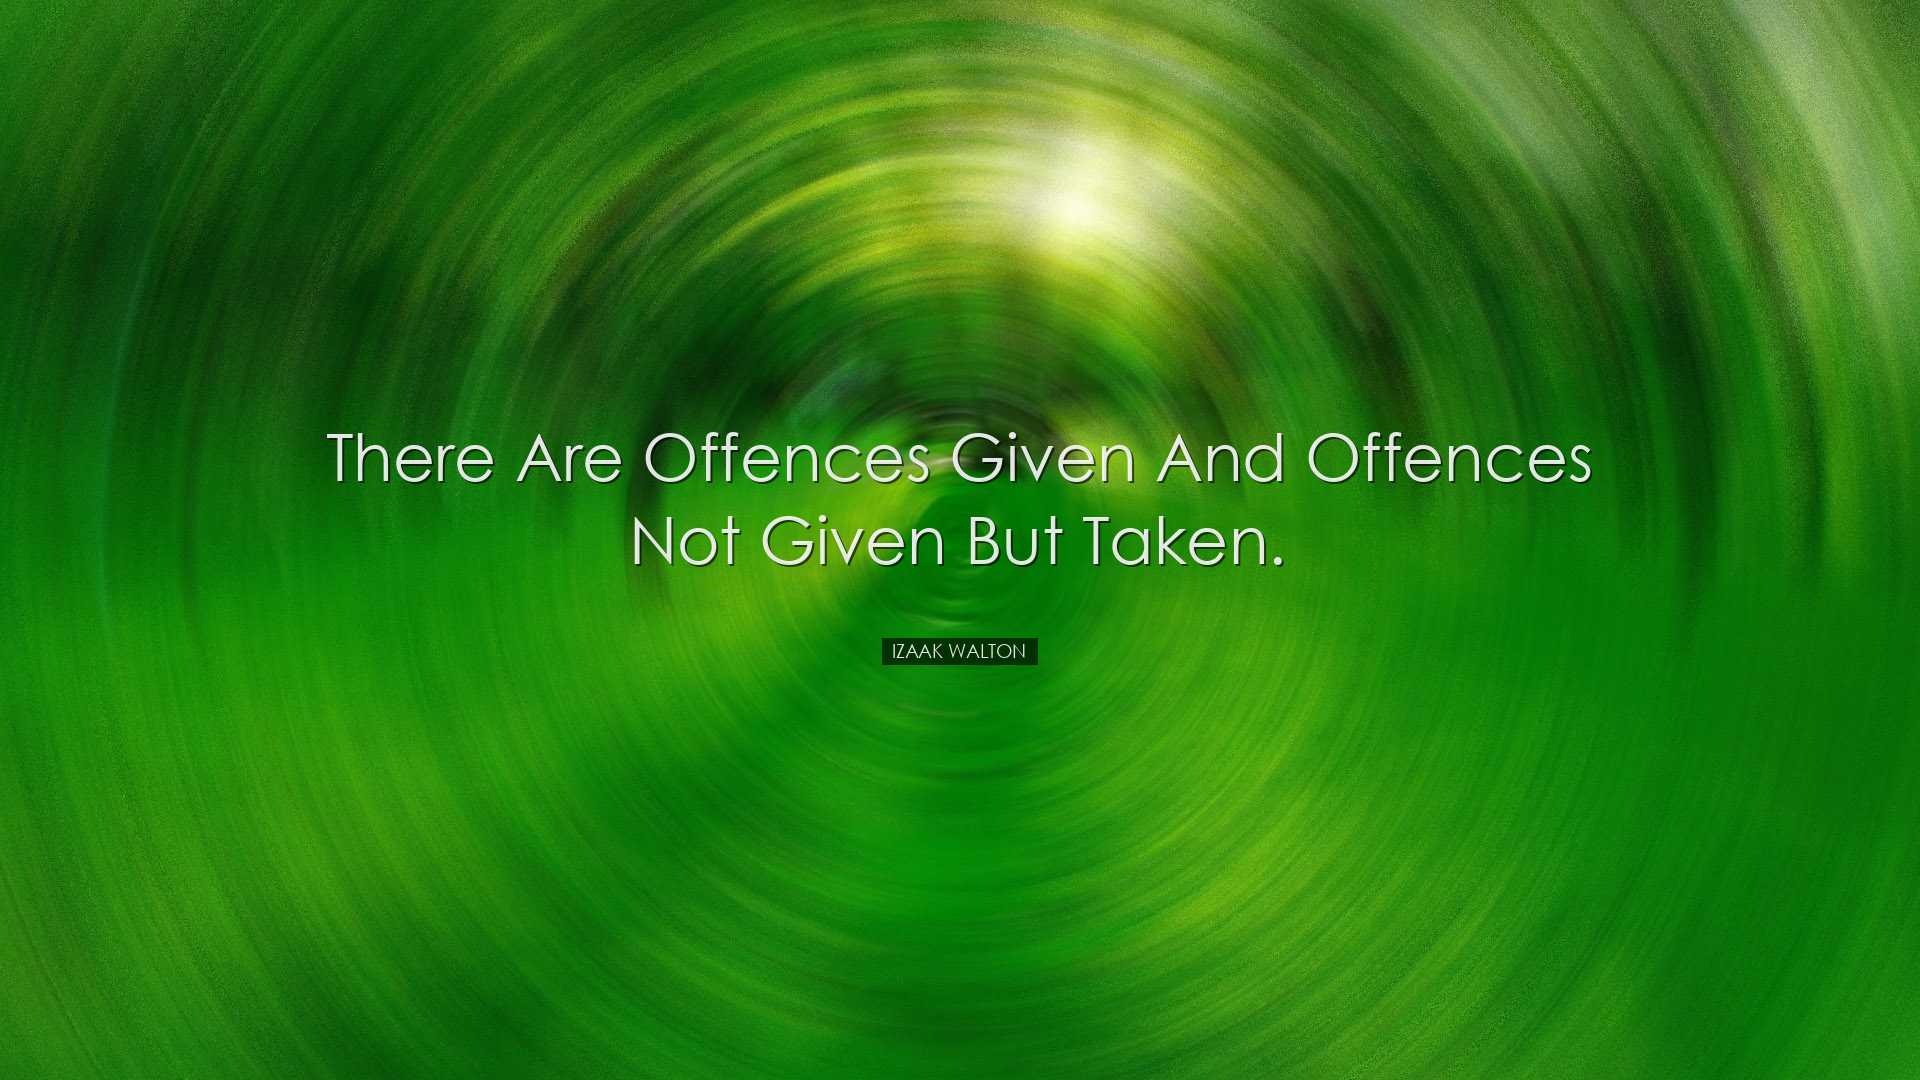 There are offences given and offences not given but taken. - Izaak